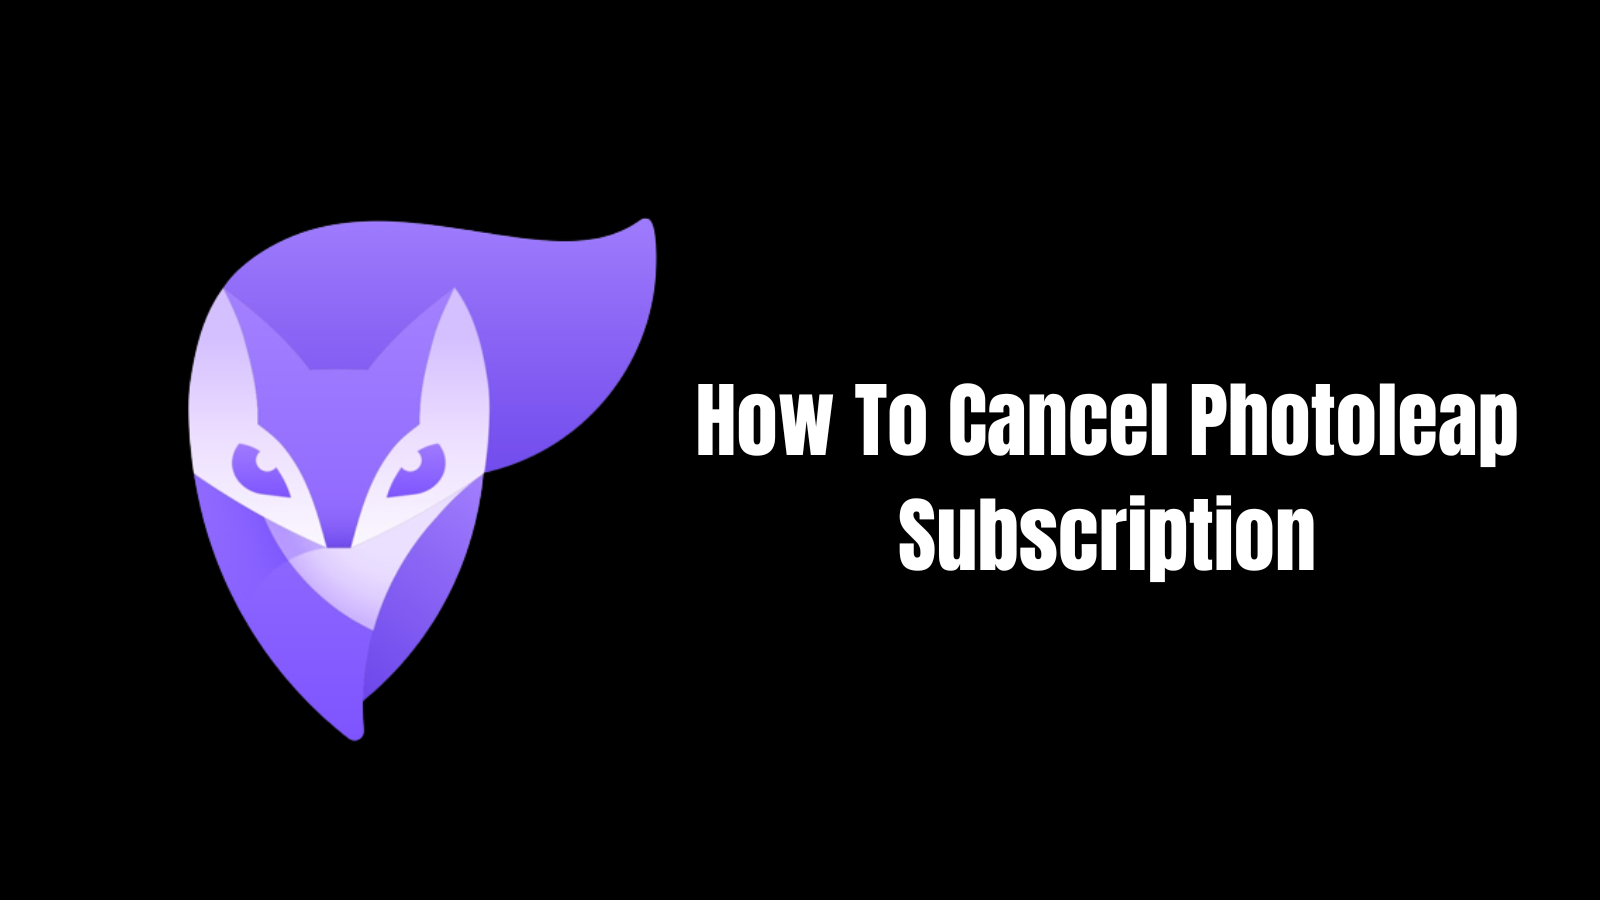 How To Cancel Photoleap Subscription